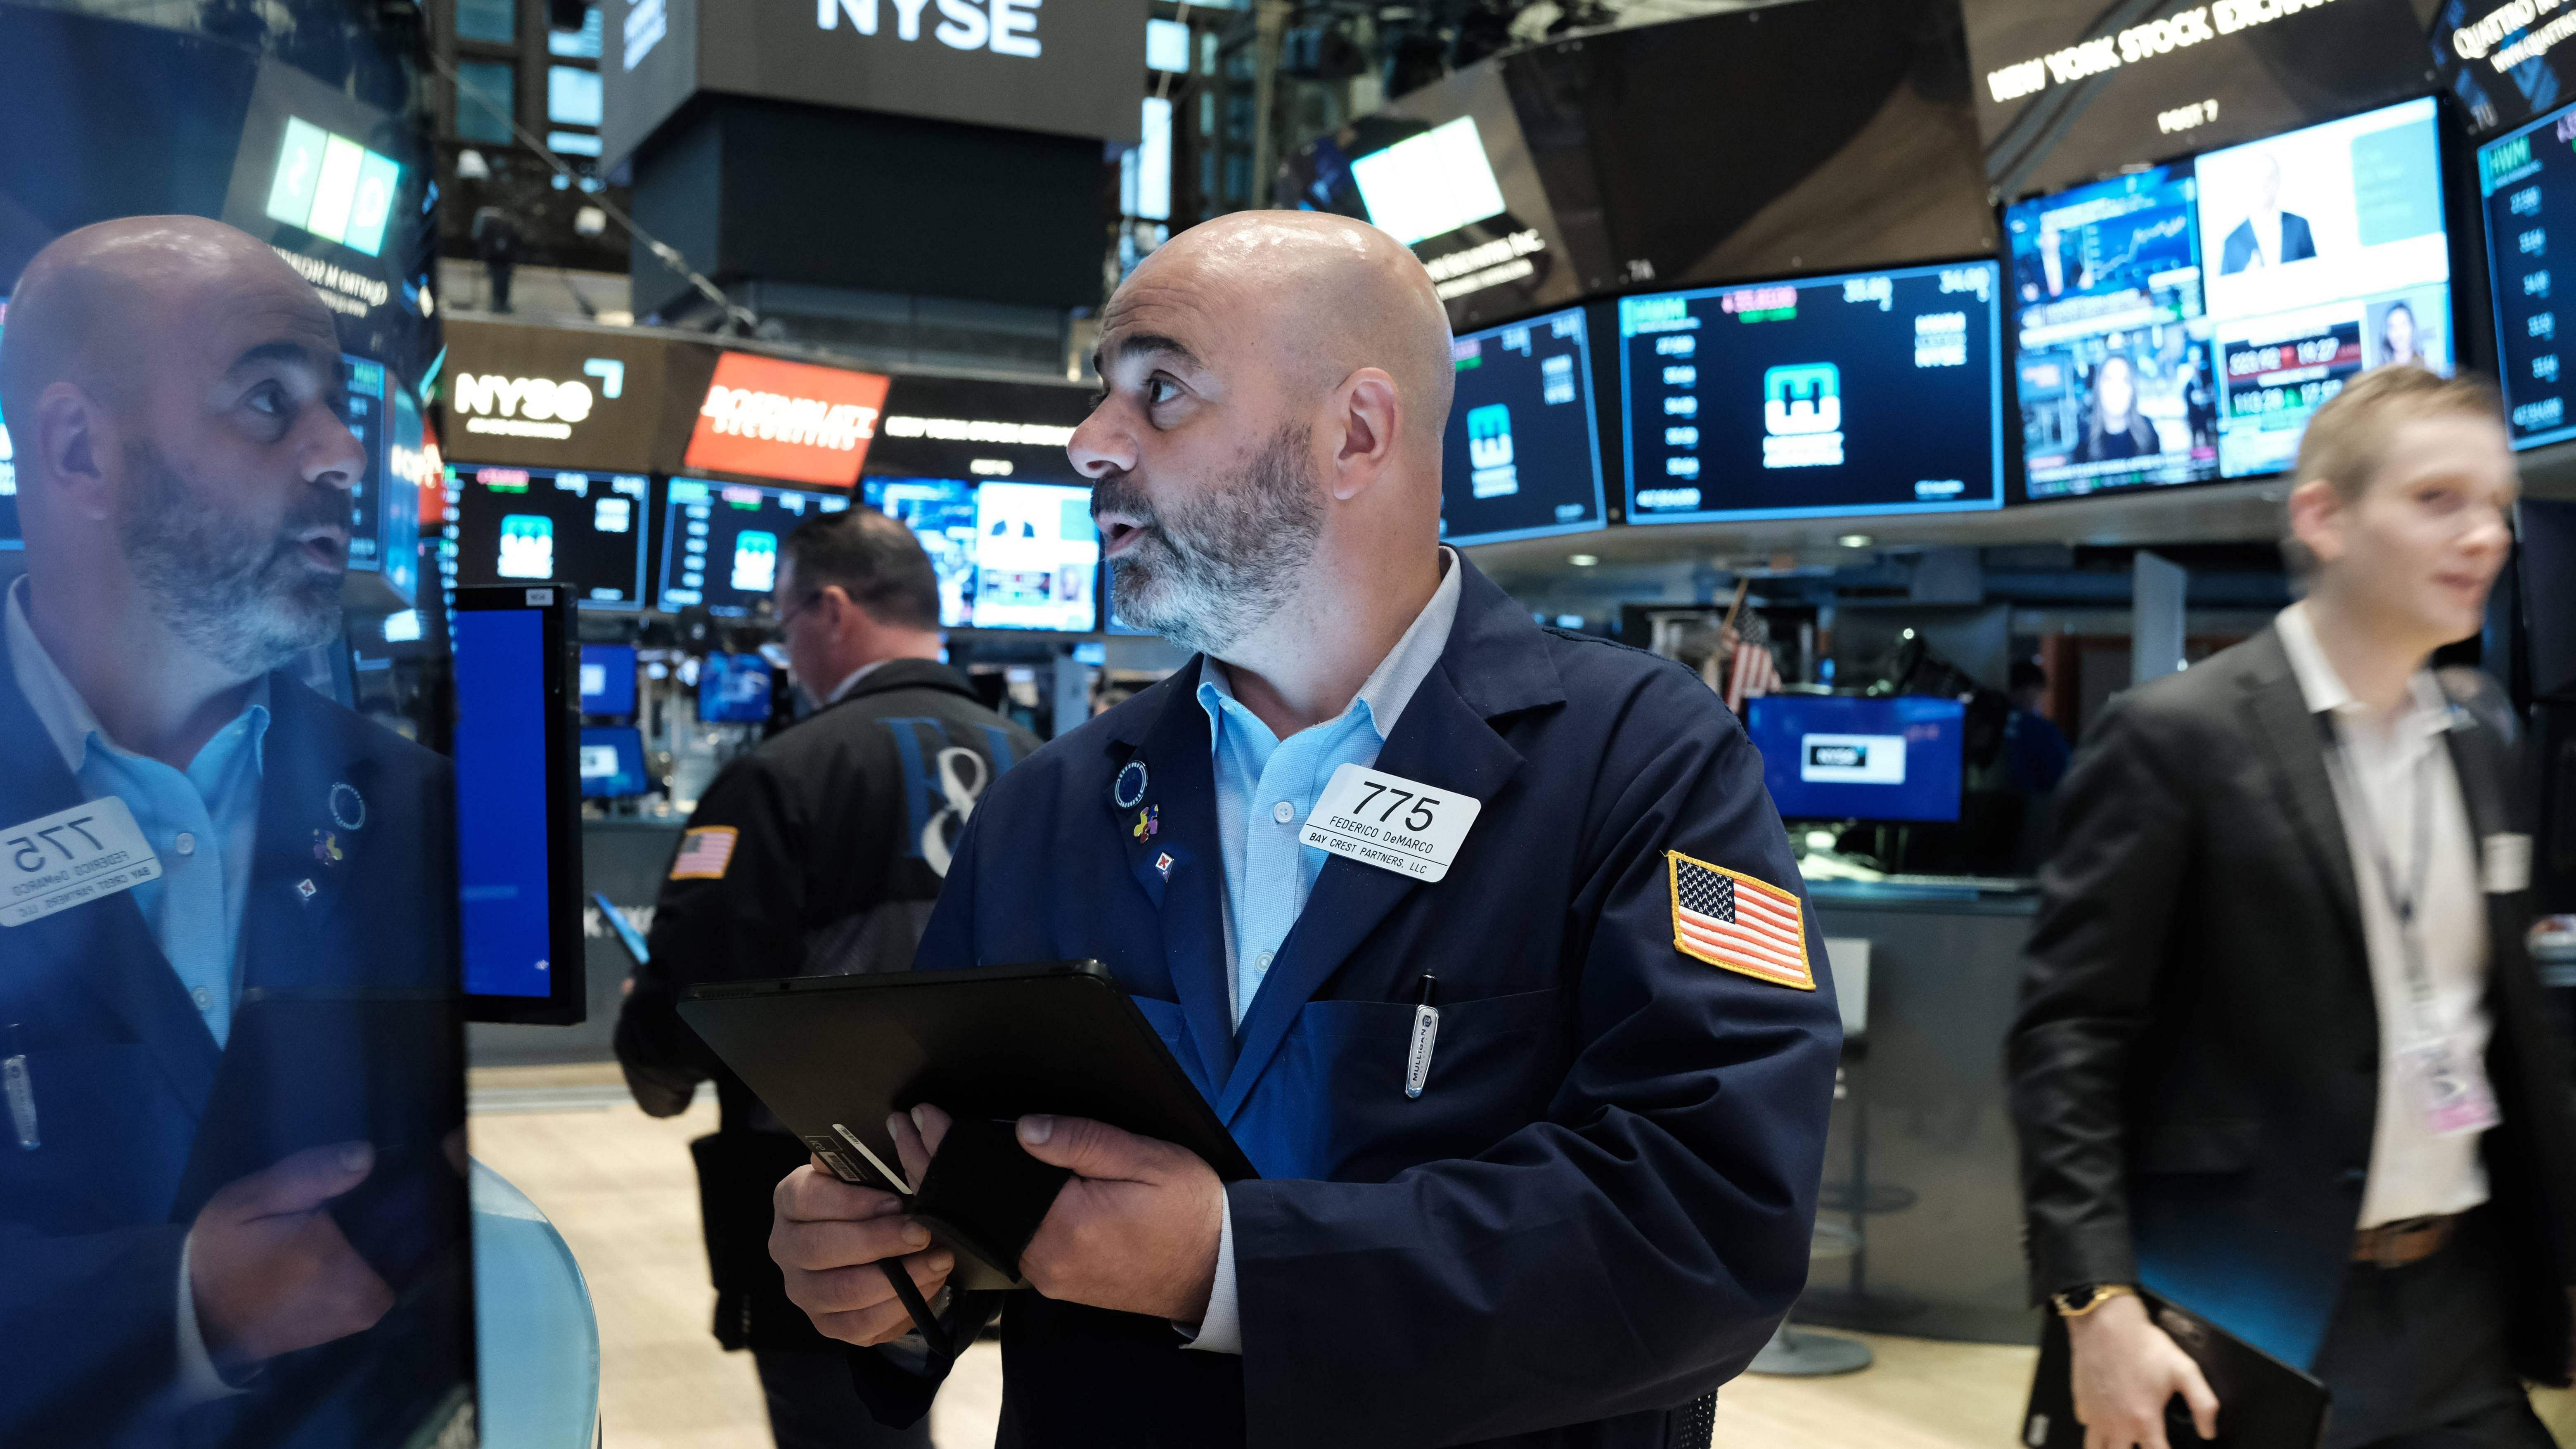 Markets have been roiled in recent weeks by worries about persistently high inflation and aggressive attempts by the Federal Reserve to rein it in while the global economy copes with fallout from Russia's invasion of Ukraine. Credit: AFP Photo